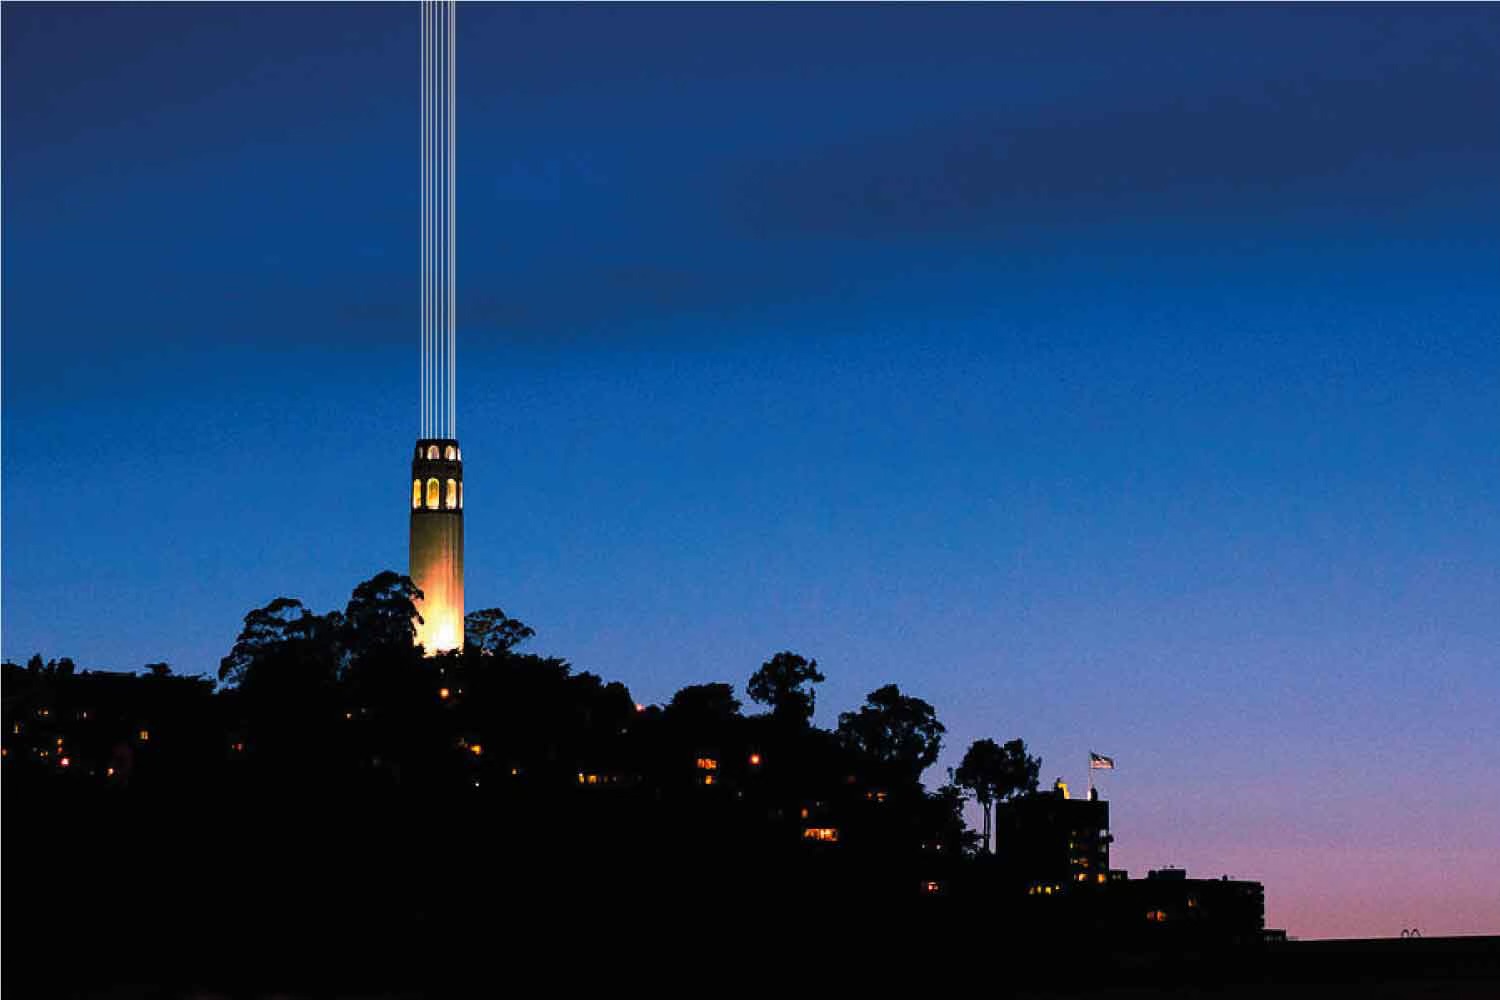 Coit Tower will light up the San Francisco skyline